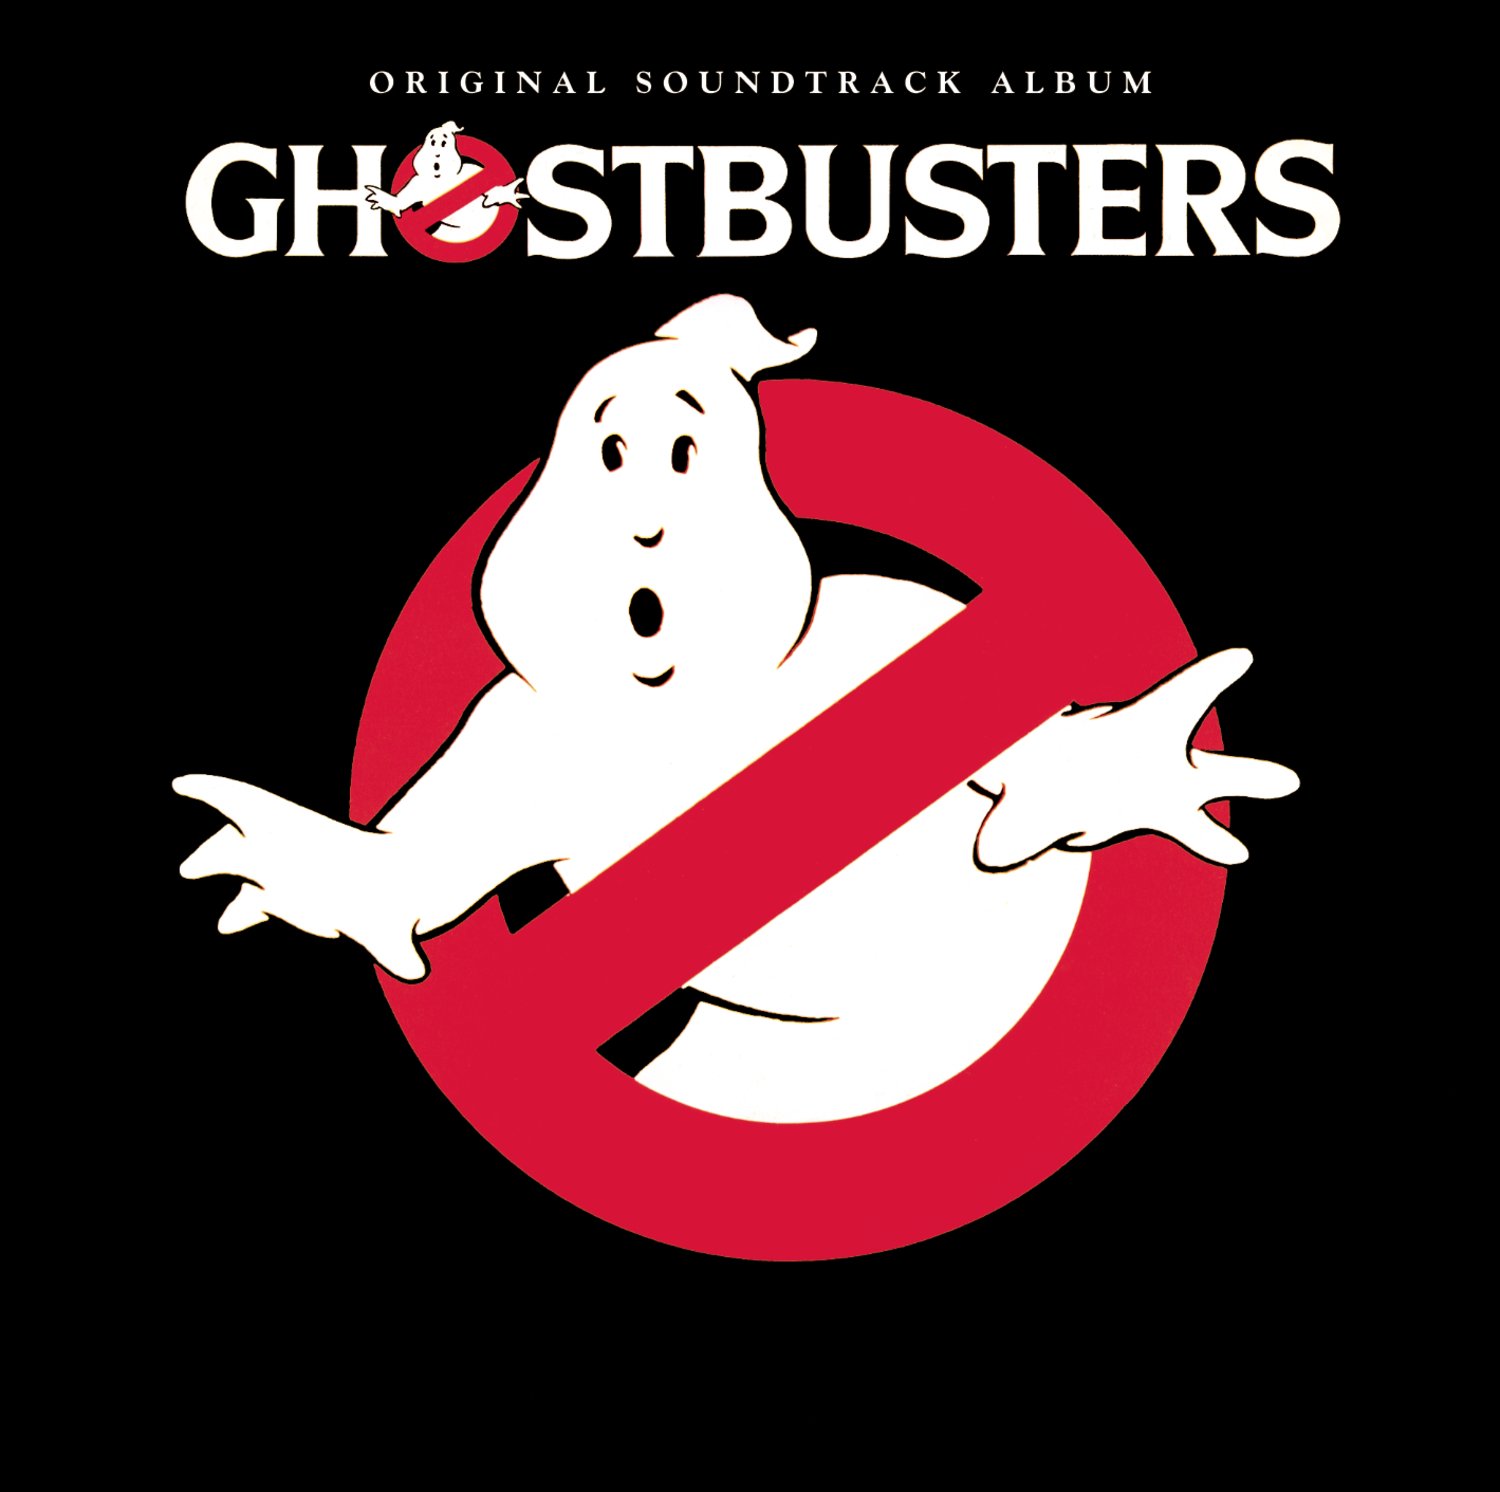 Art for GhostBusters by Ghostbusters (Original Motion Picture Soundtrack)